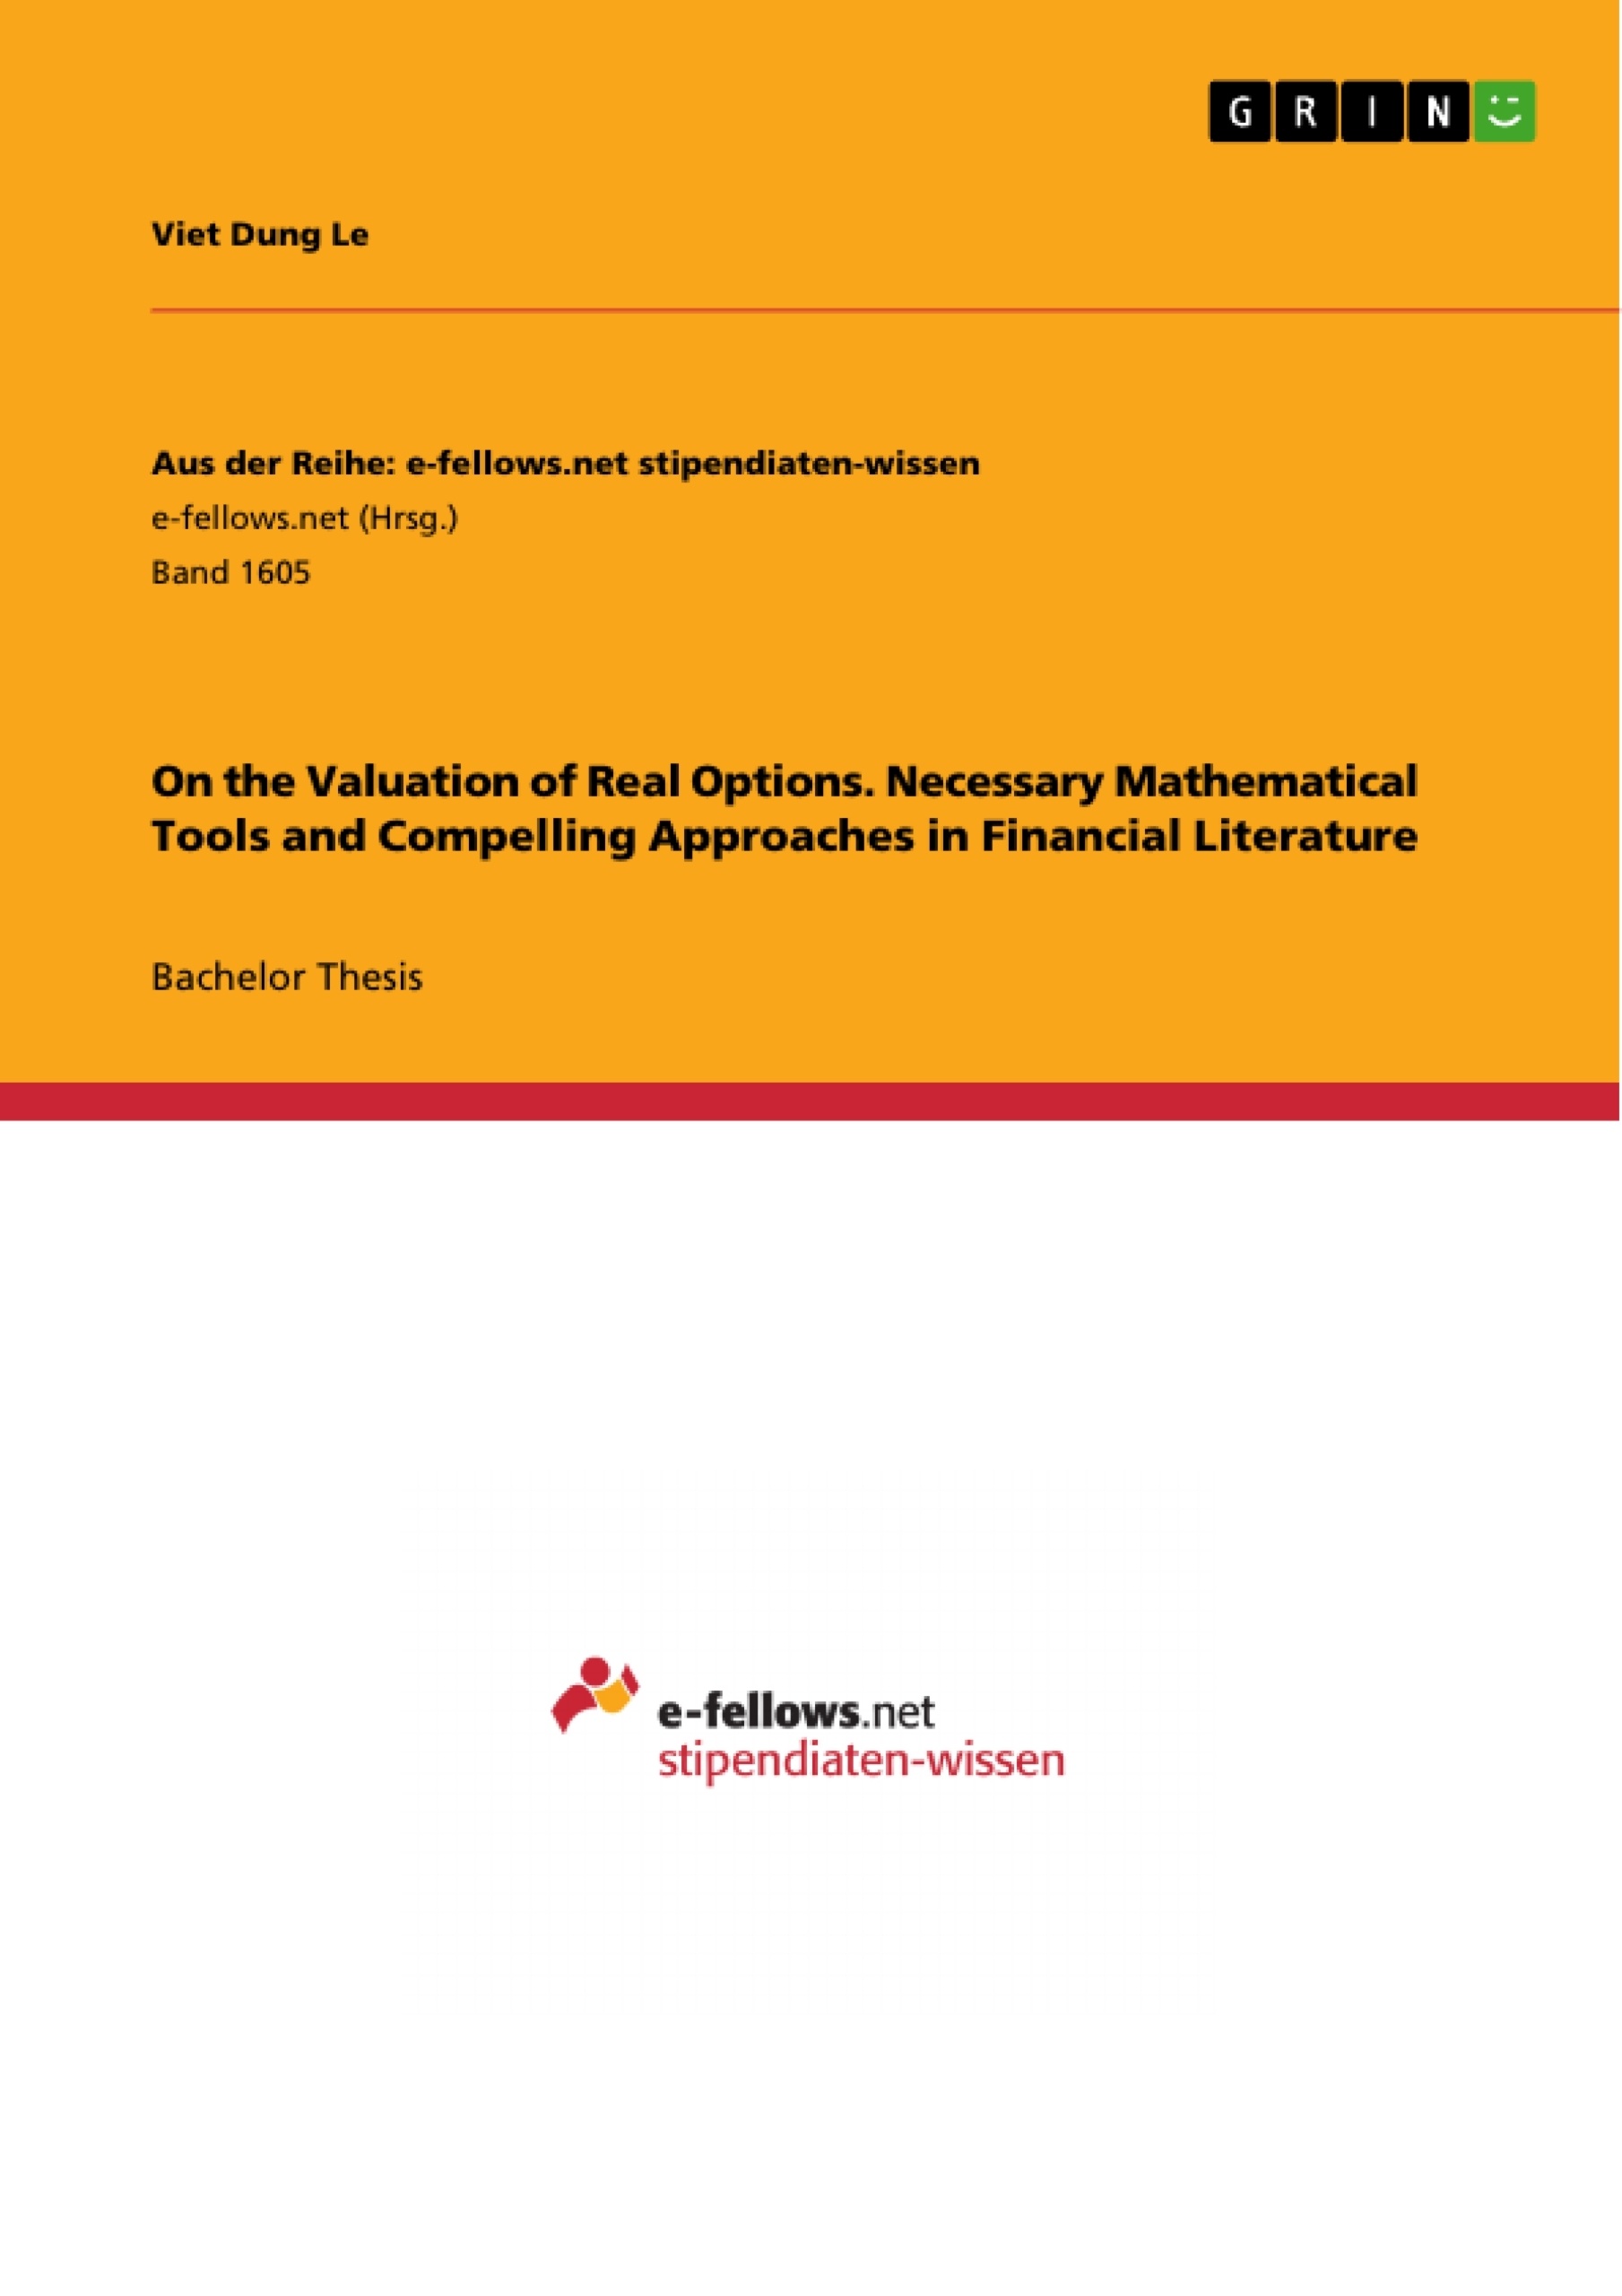 Titre: On the Valuation of Real Options. Necessary Mathematical Tools and Compelling Approaches in Financial Literature